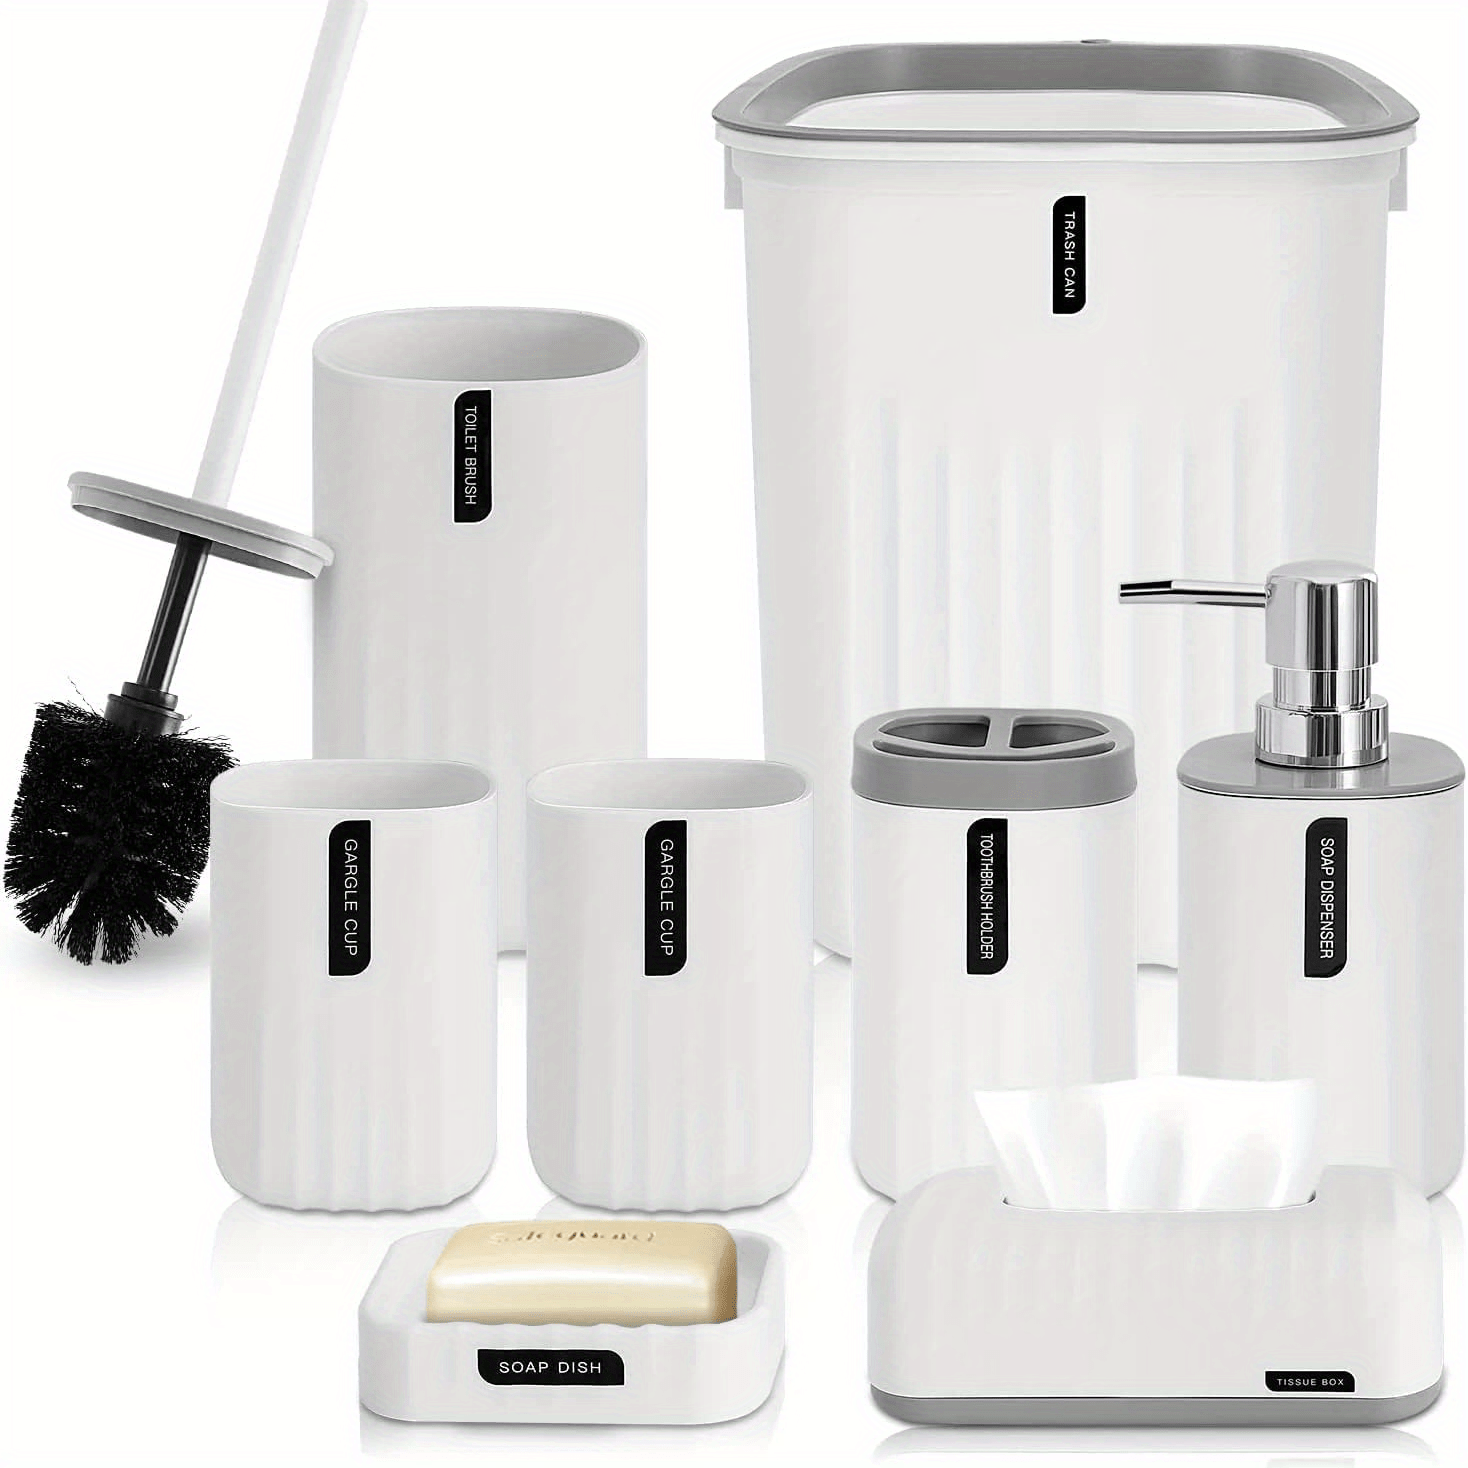 1pc, 7 Bathroom Accessories Set, Bathroom Decor, Plastic & stainless steel  Bath Ensemble Kit with Lotion Dispenser, Toothbrush Holder, Toothbrush Cup,  Soap Dish, Toilet Brush & Holder, Trash Can,Birthday, holiday,  housewarming, Christmas